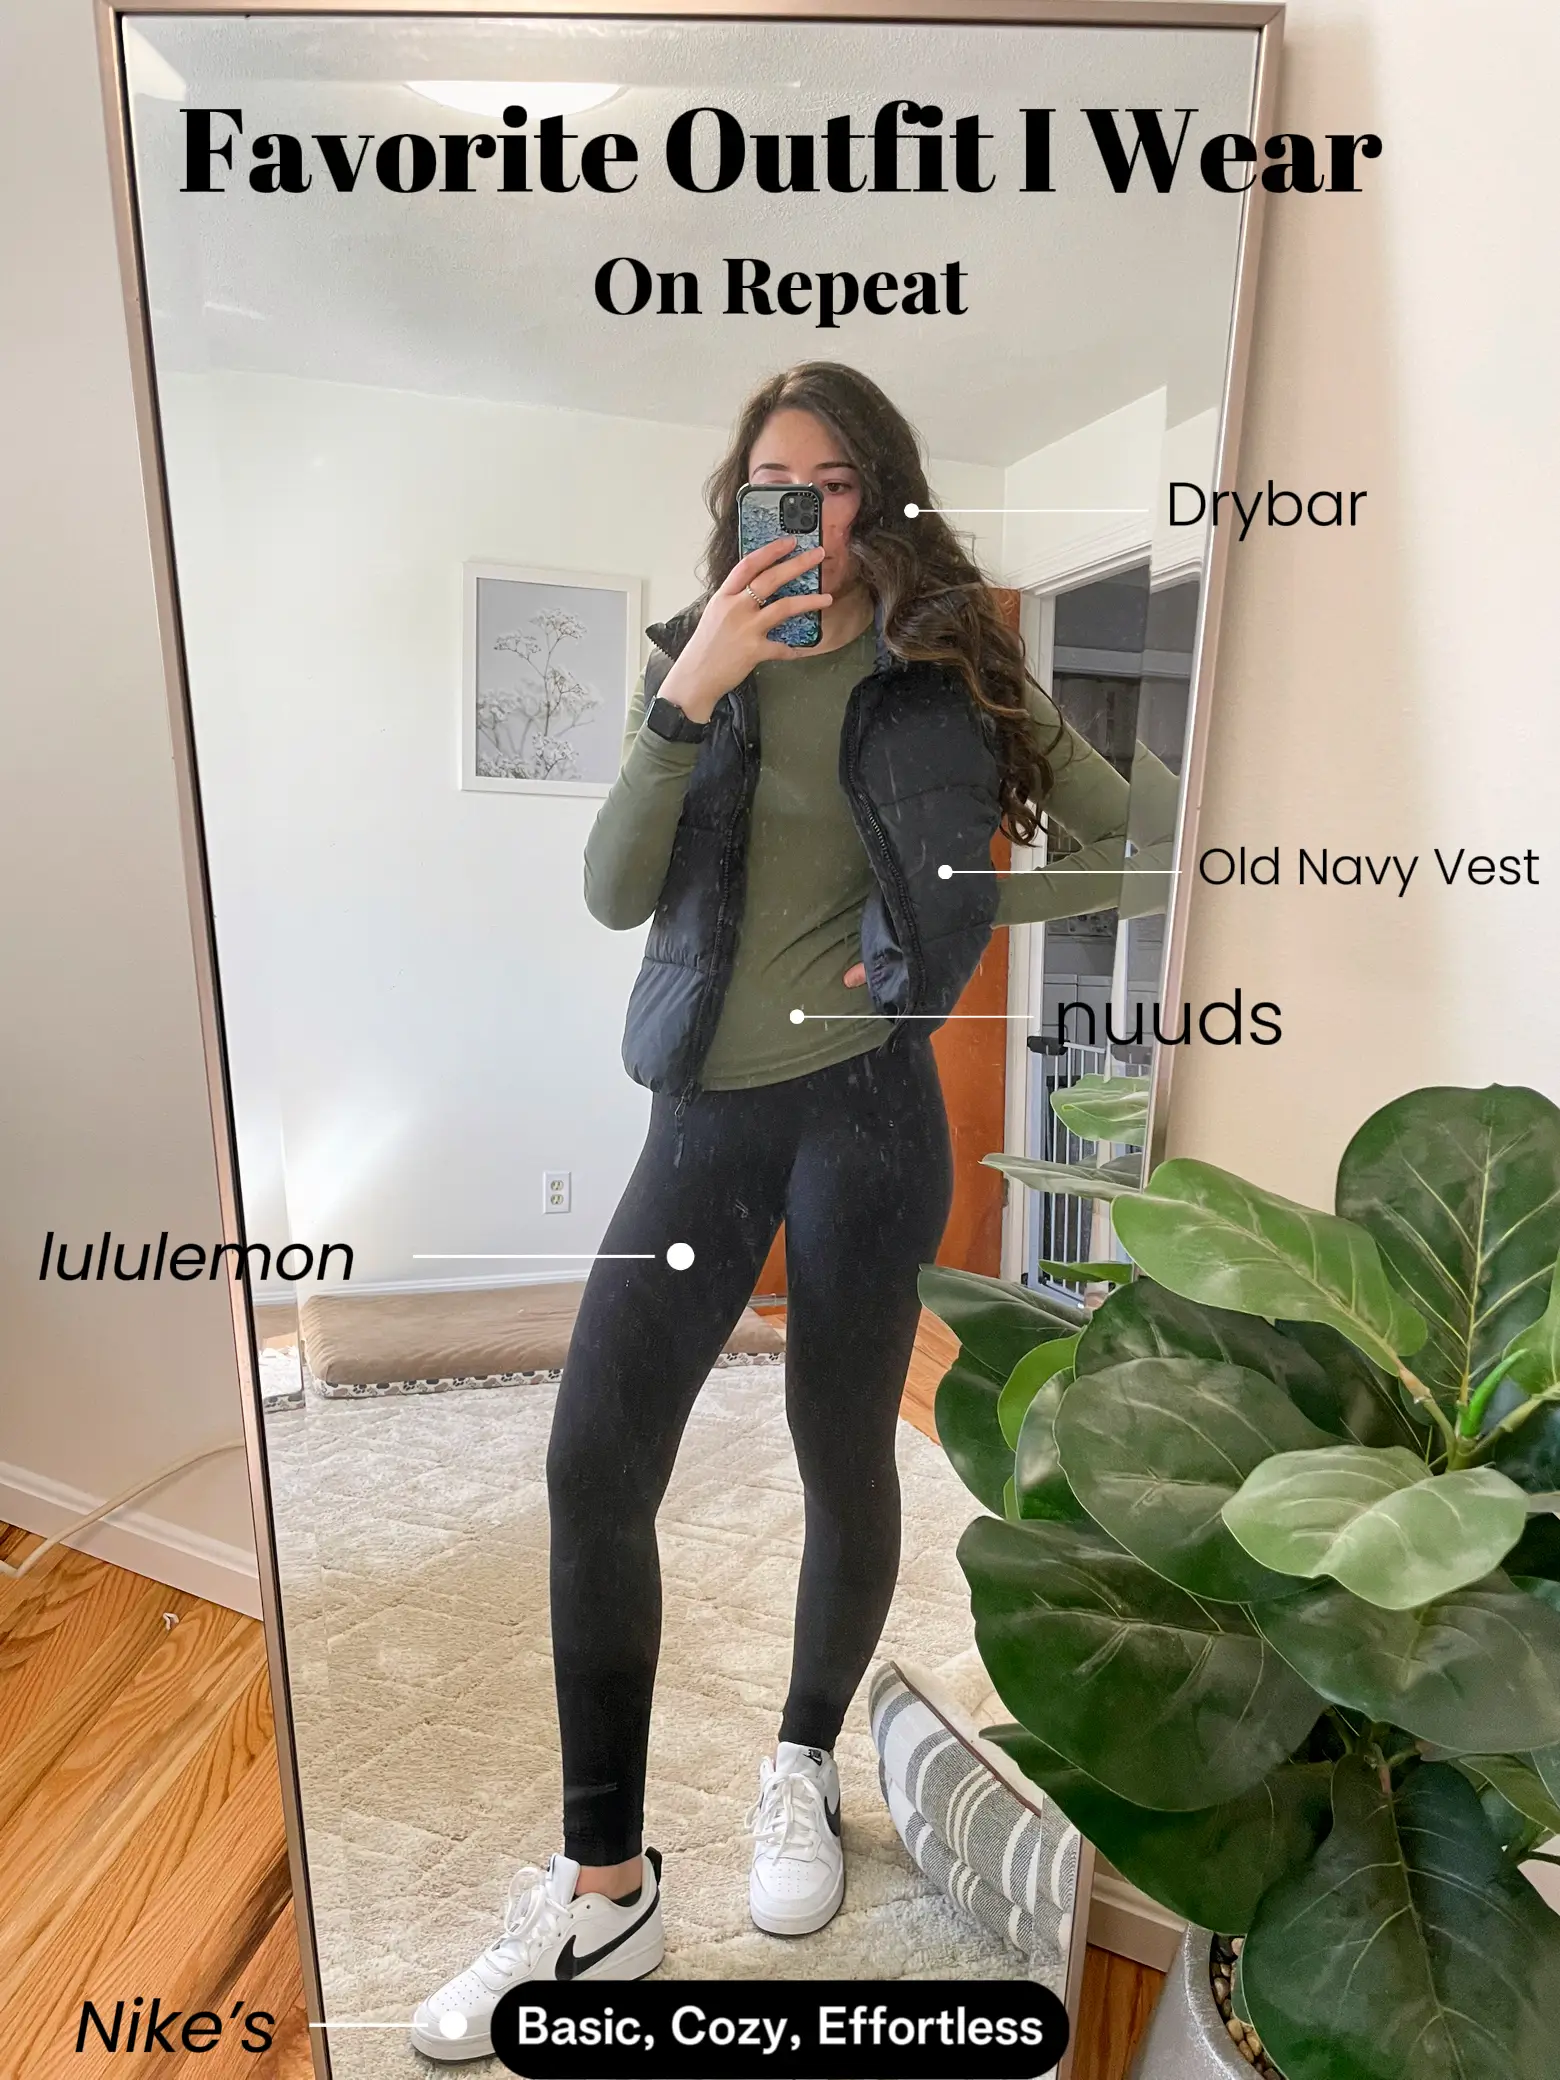 legging outfit business casual - Lemon8 Search